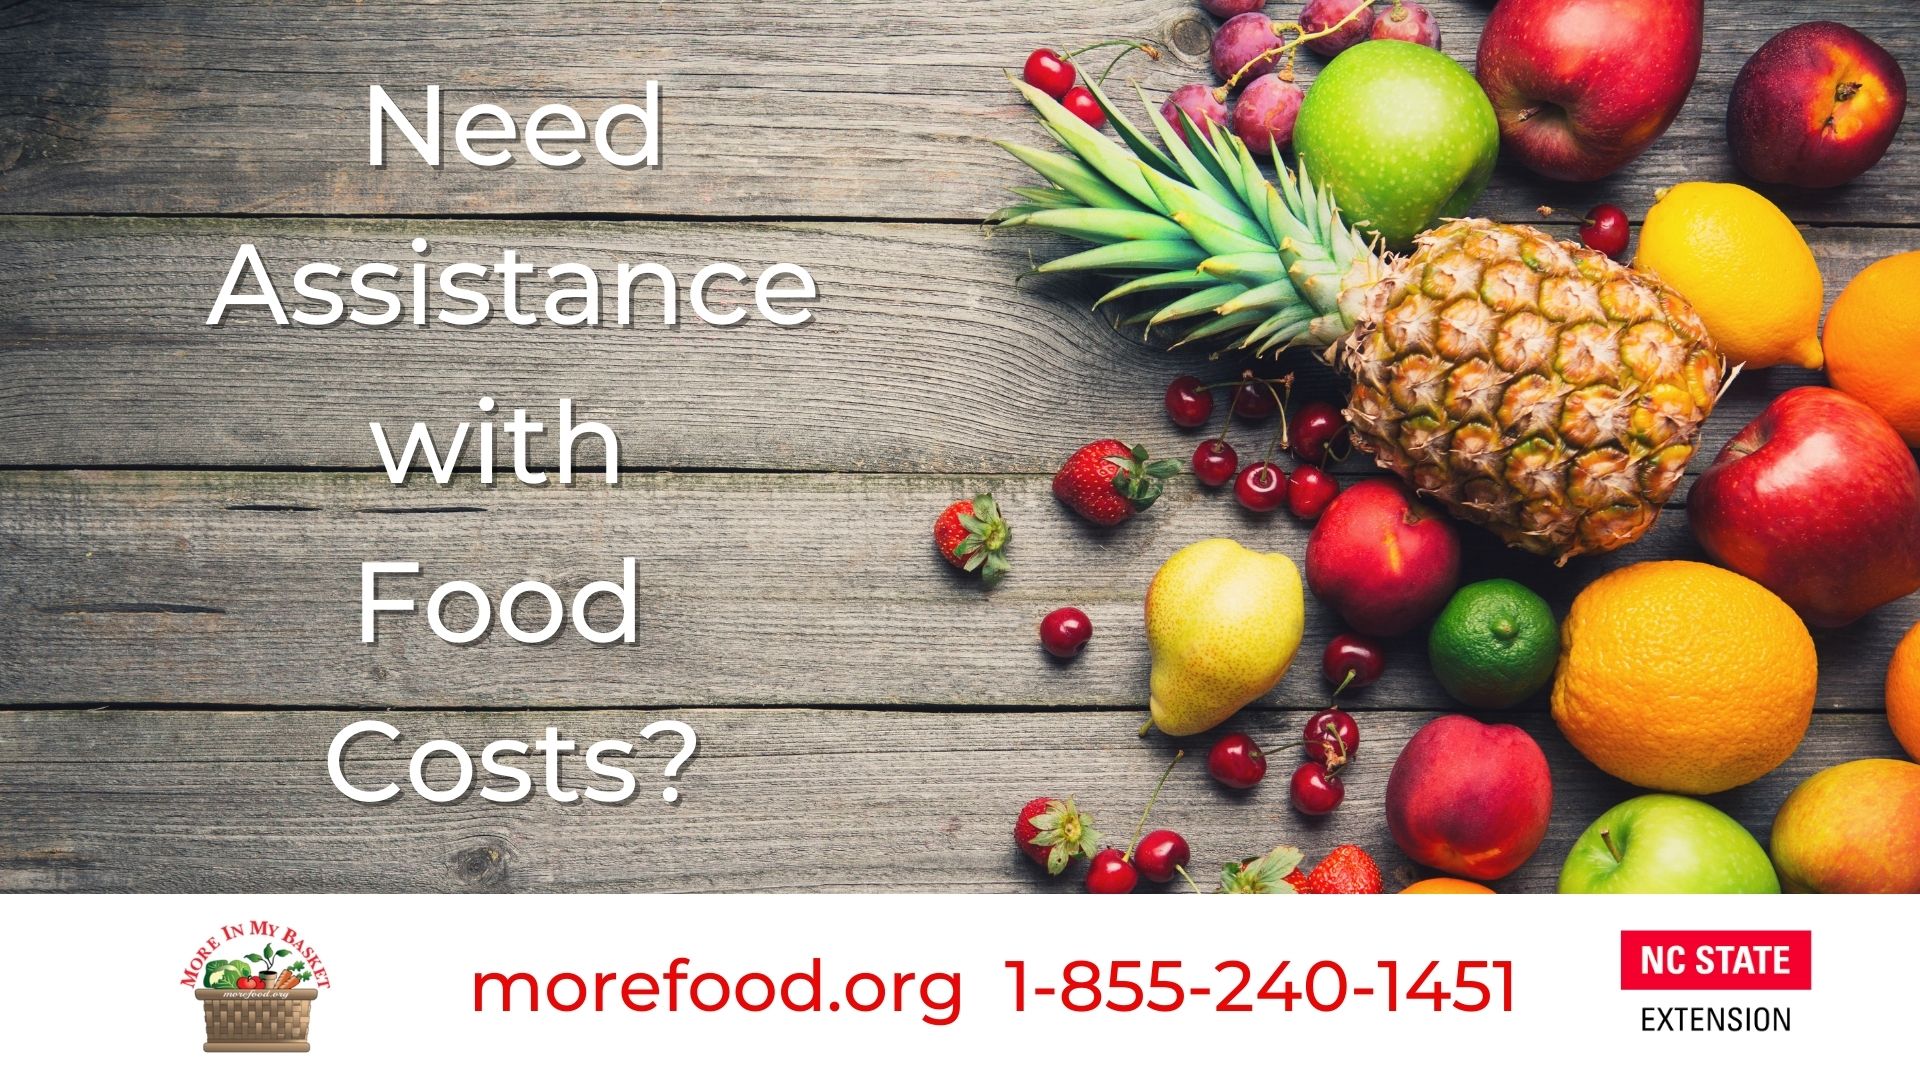 Need Assistance with food costs? Morefood.org, 1-855-240-1451